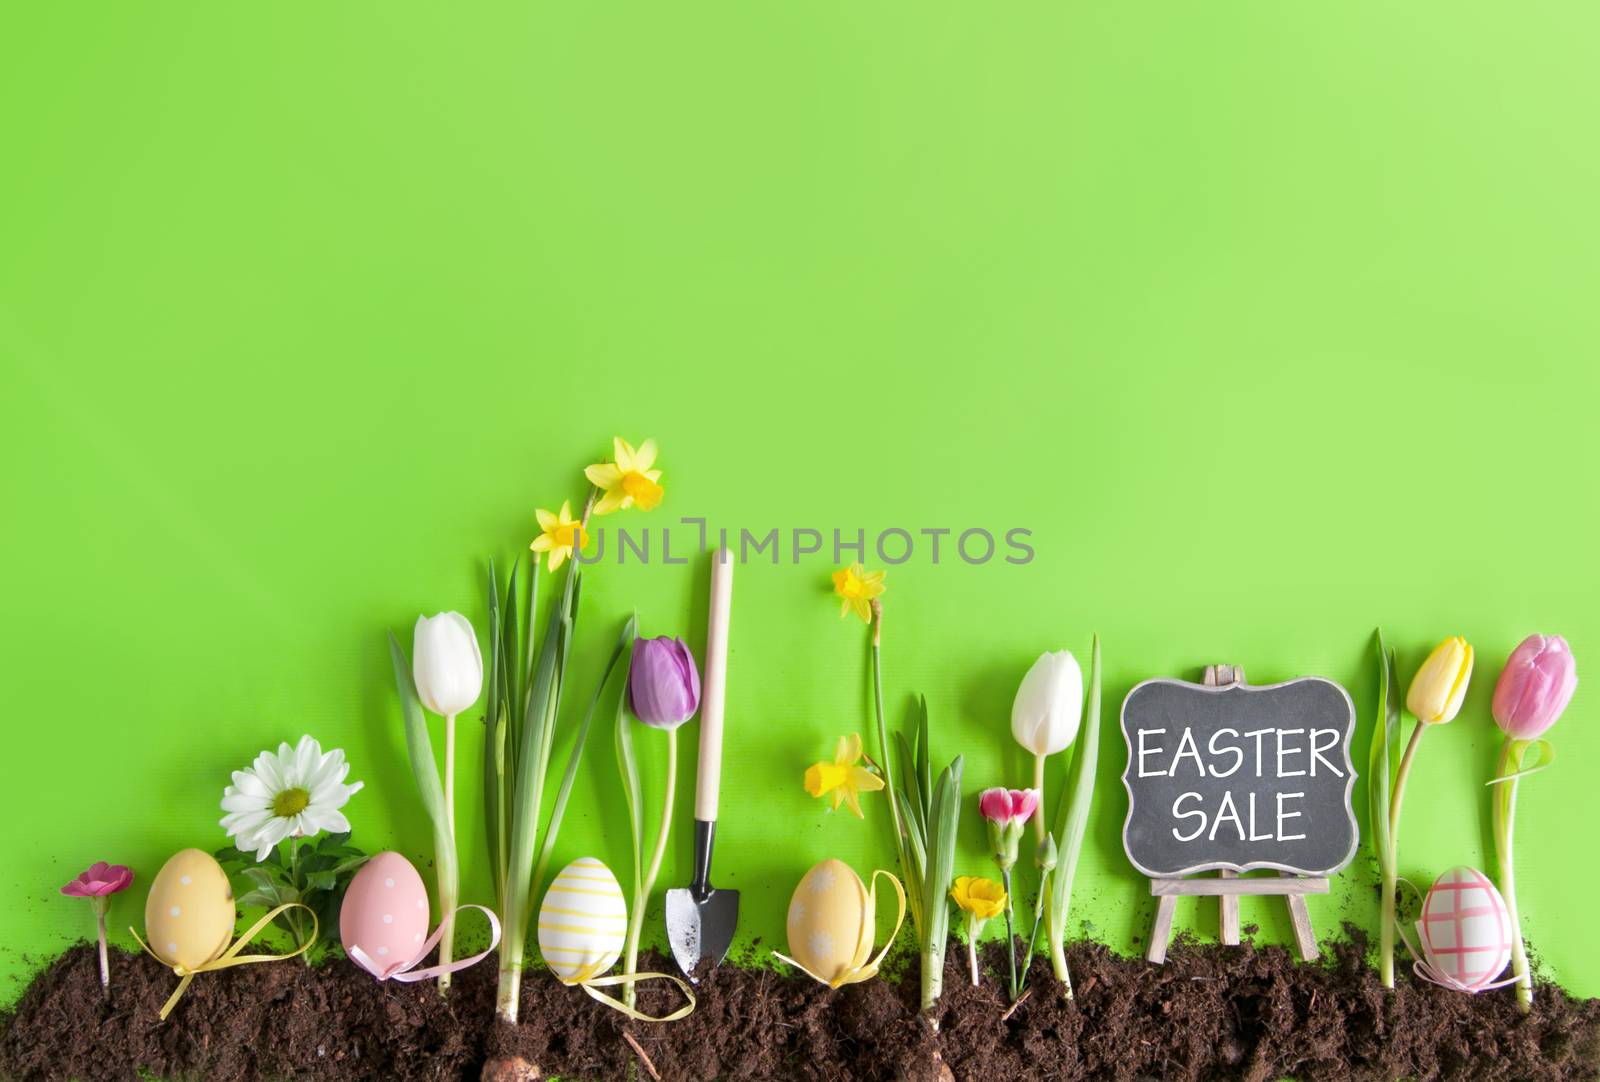 Easter sale sign on a chalkboard on a flower bed background with row of painted eggs amongst flowers